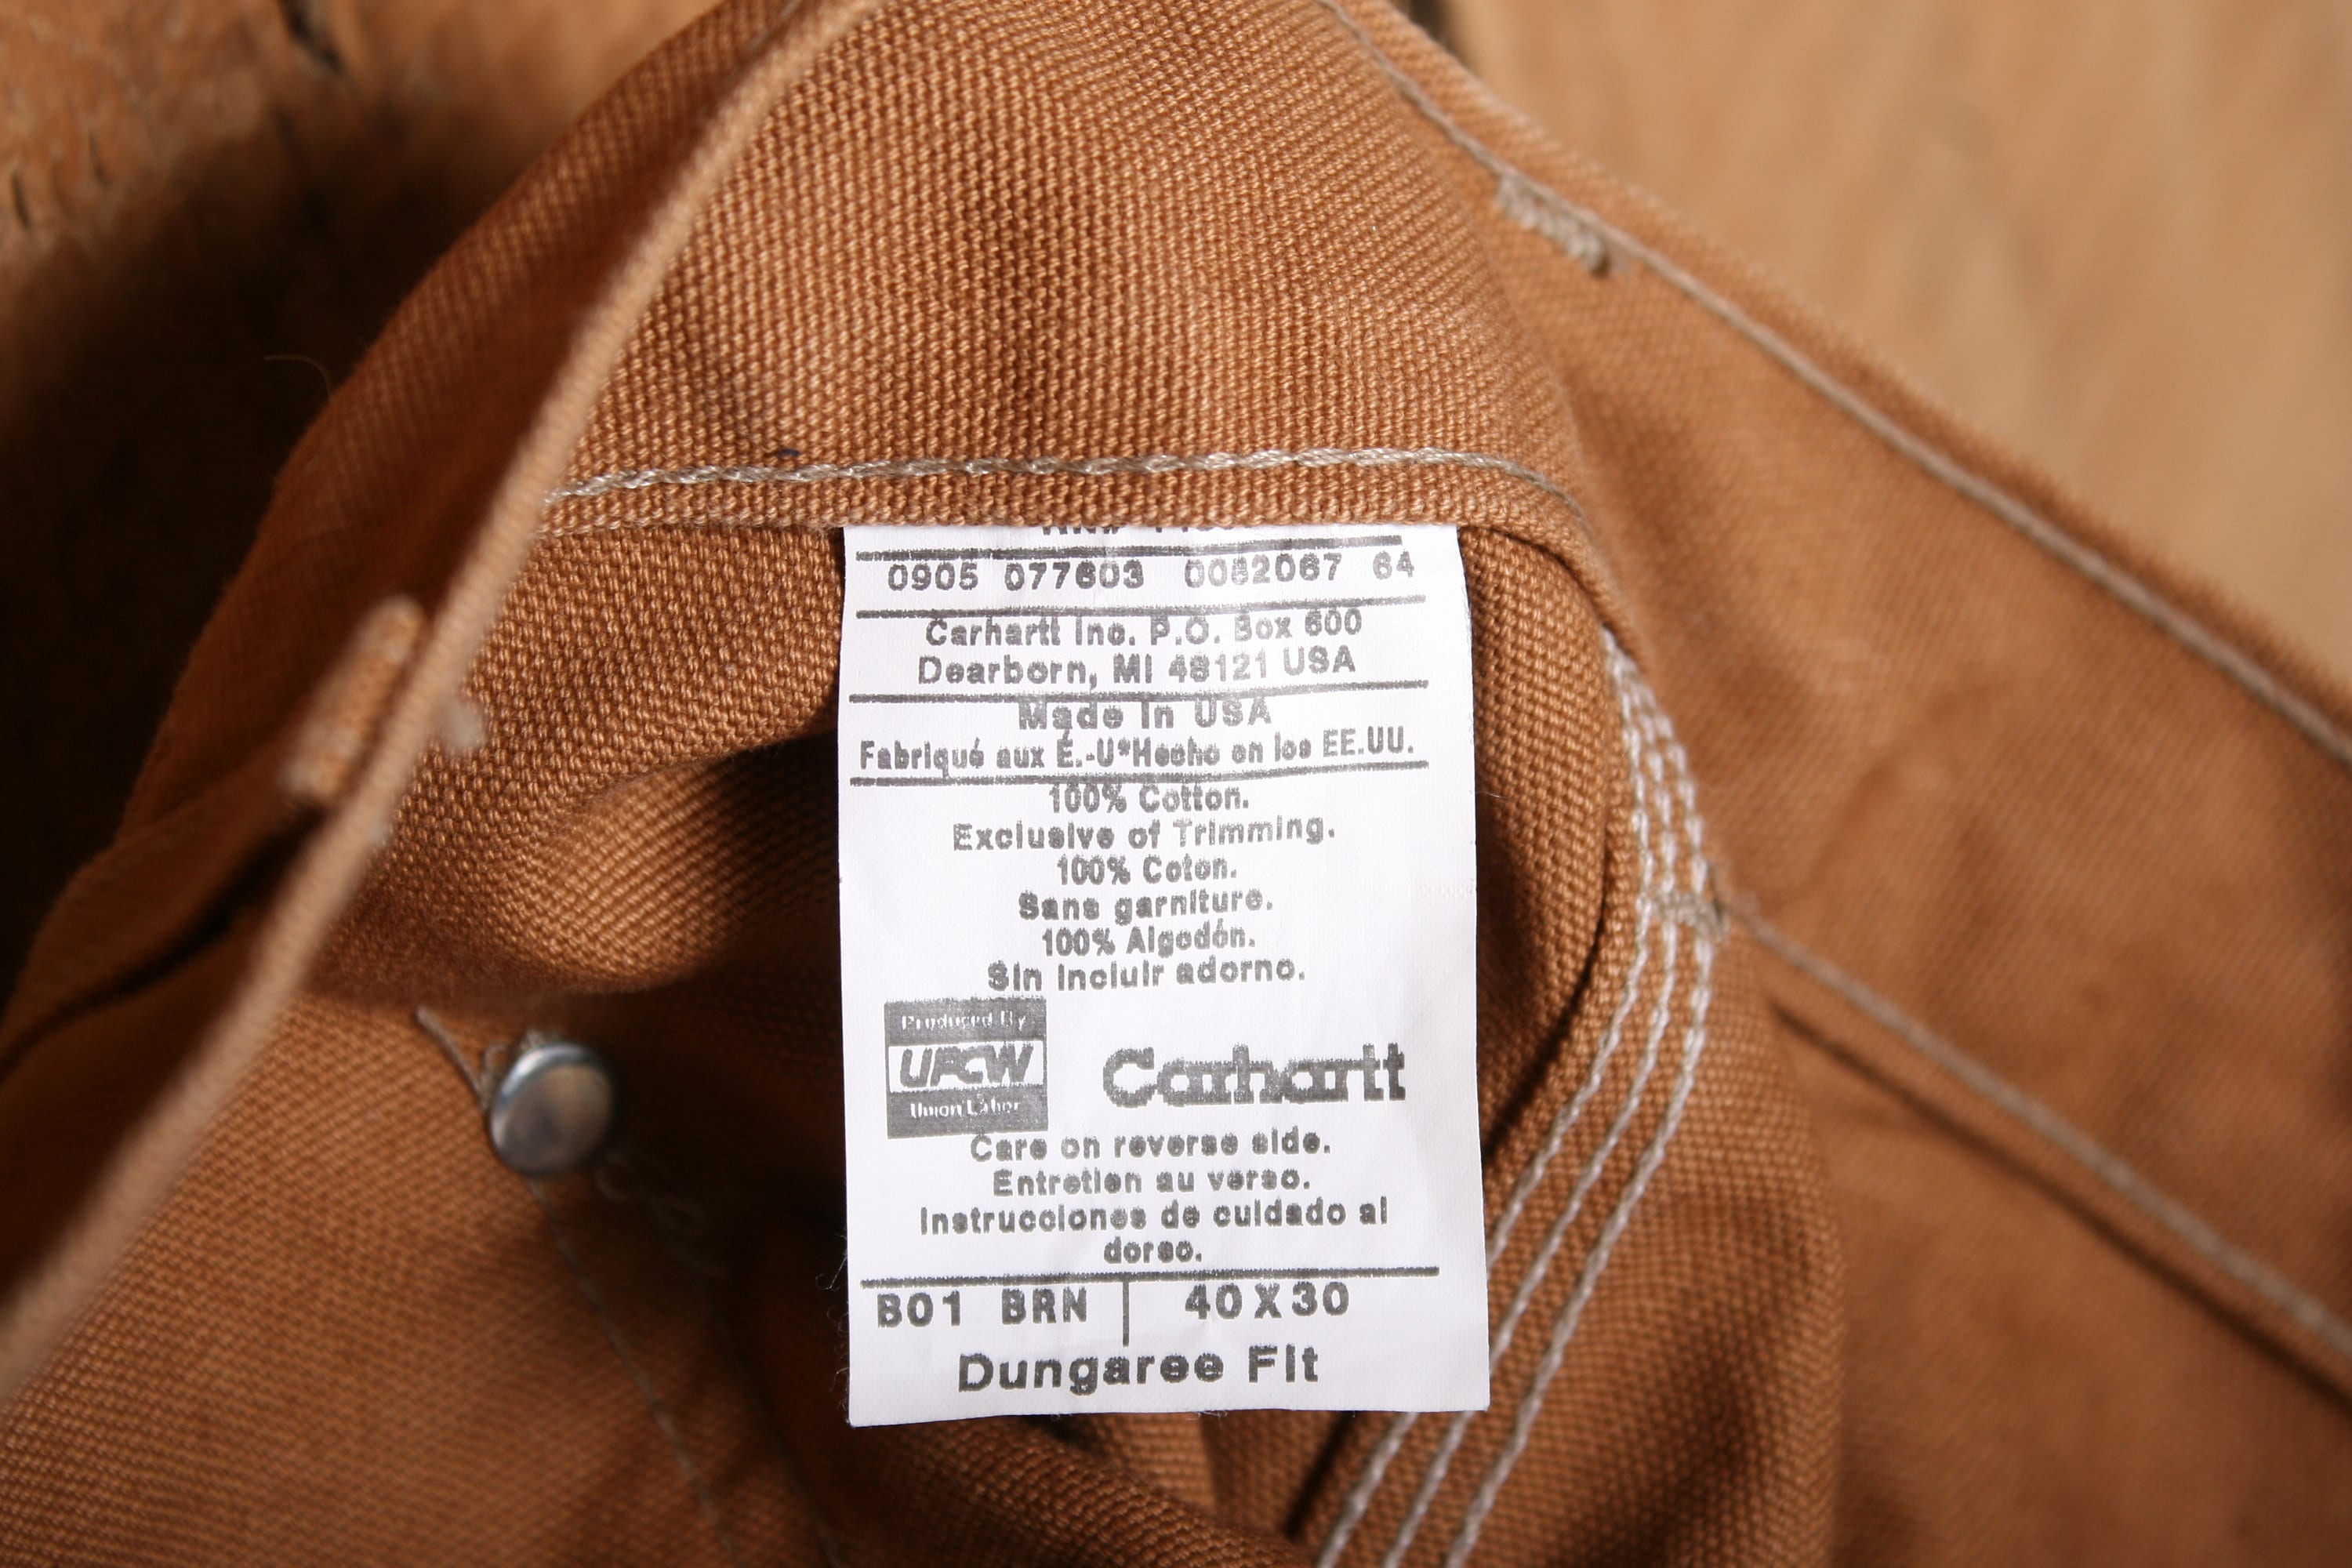 Sz. 40x30 Vintage CARHARTT Model B01 BRN Brown Duck Canvas Double Knee  Dungaree Fit Work Pants Union Made in USA 